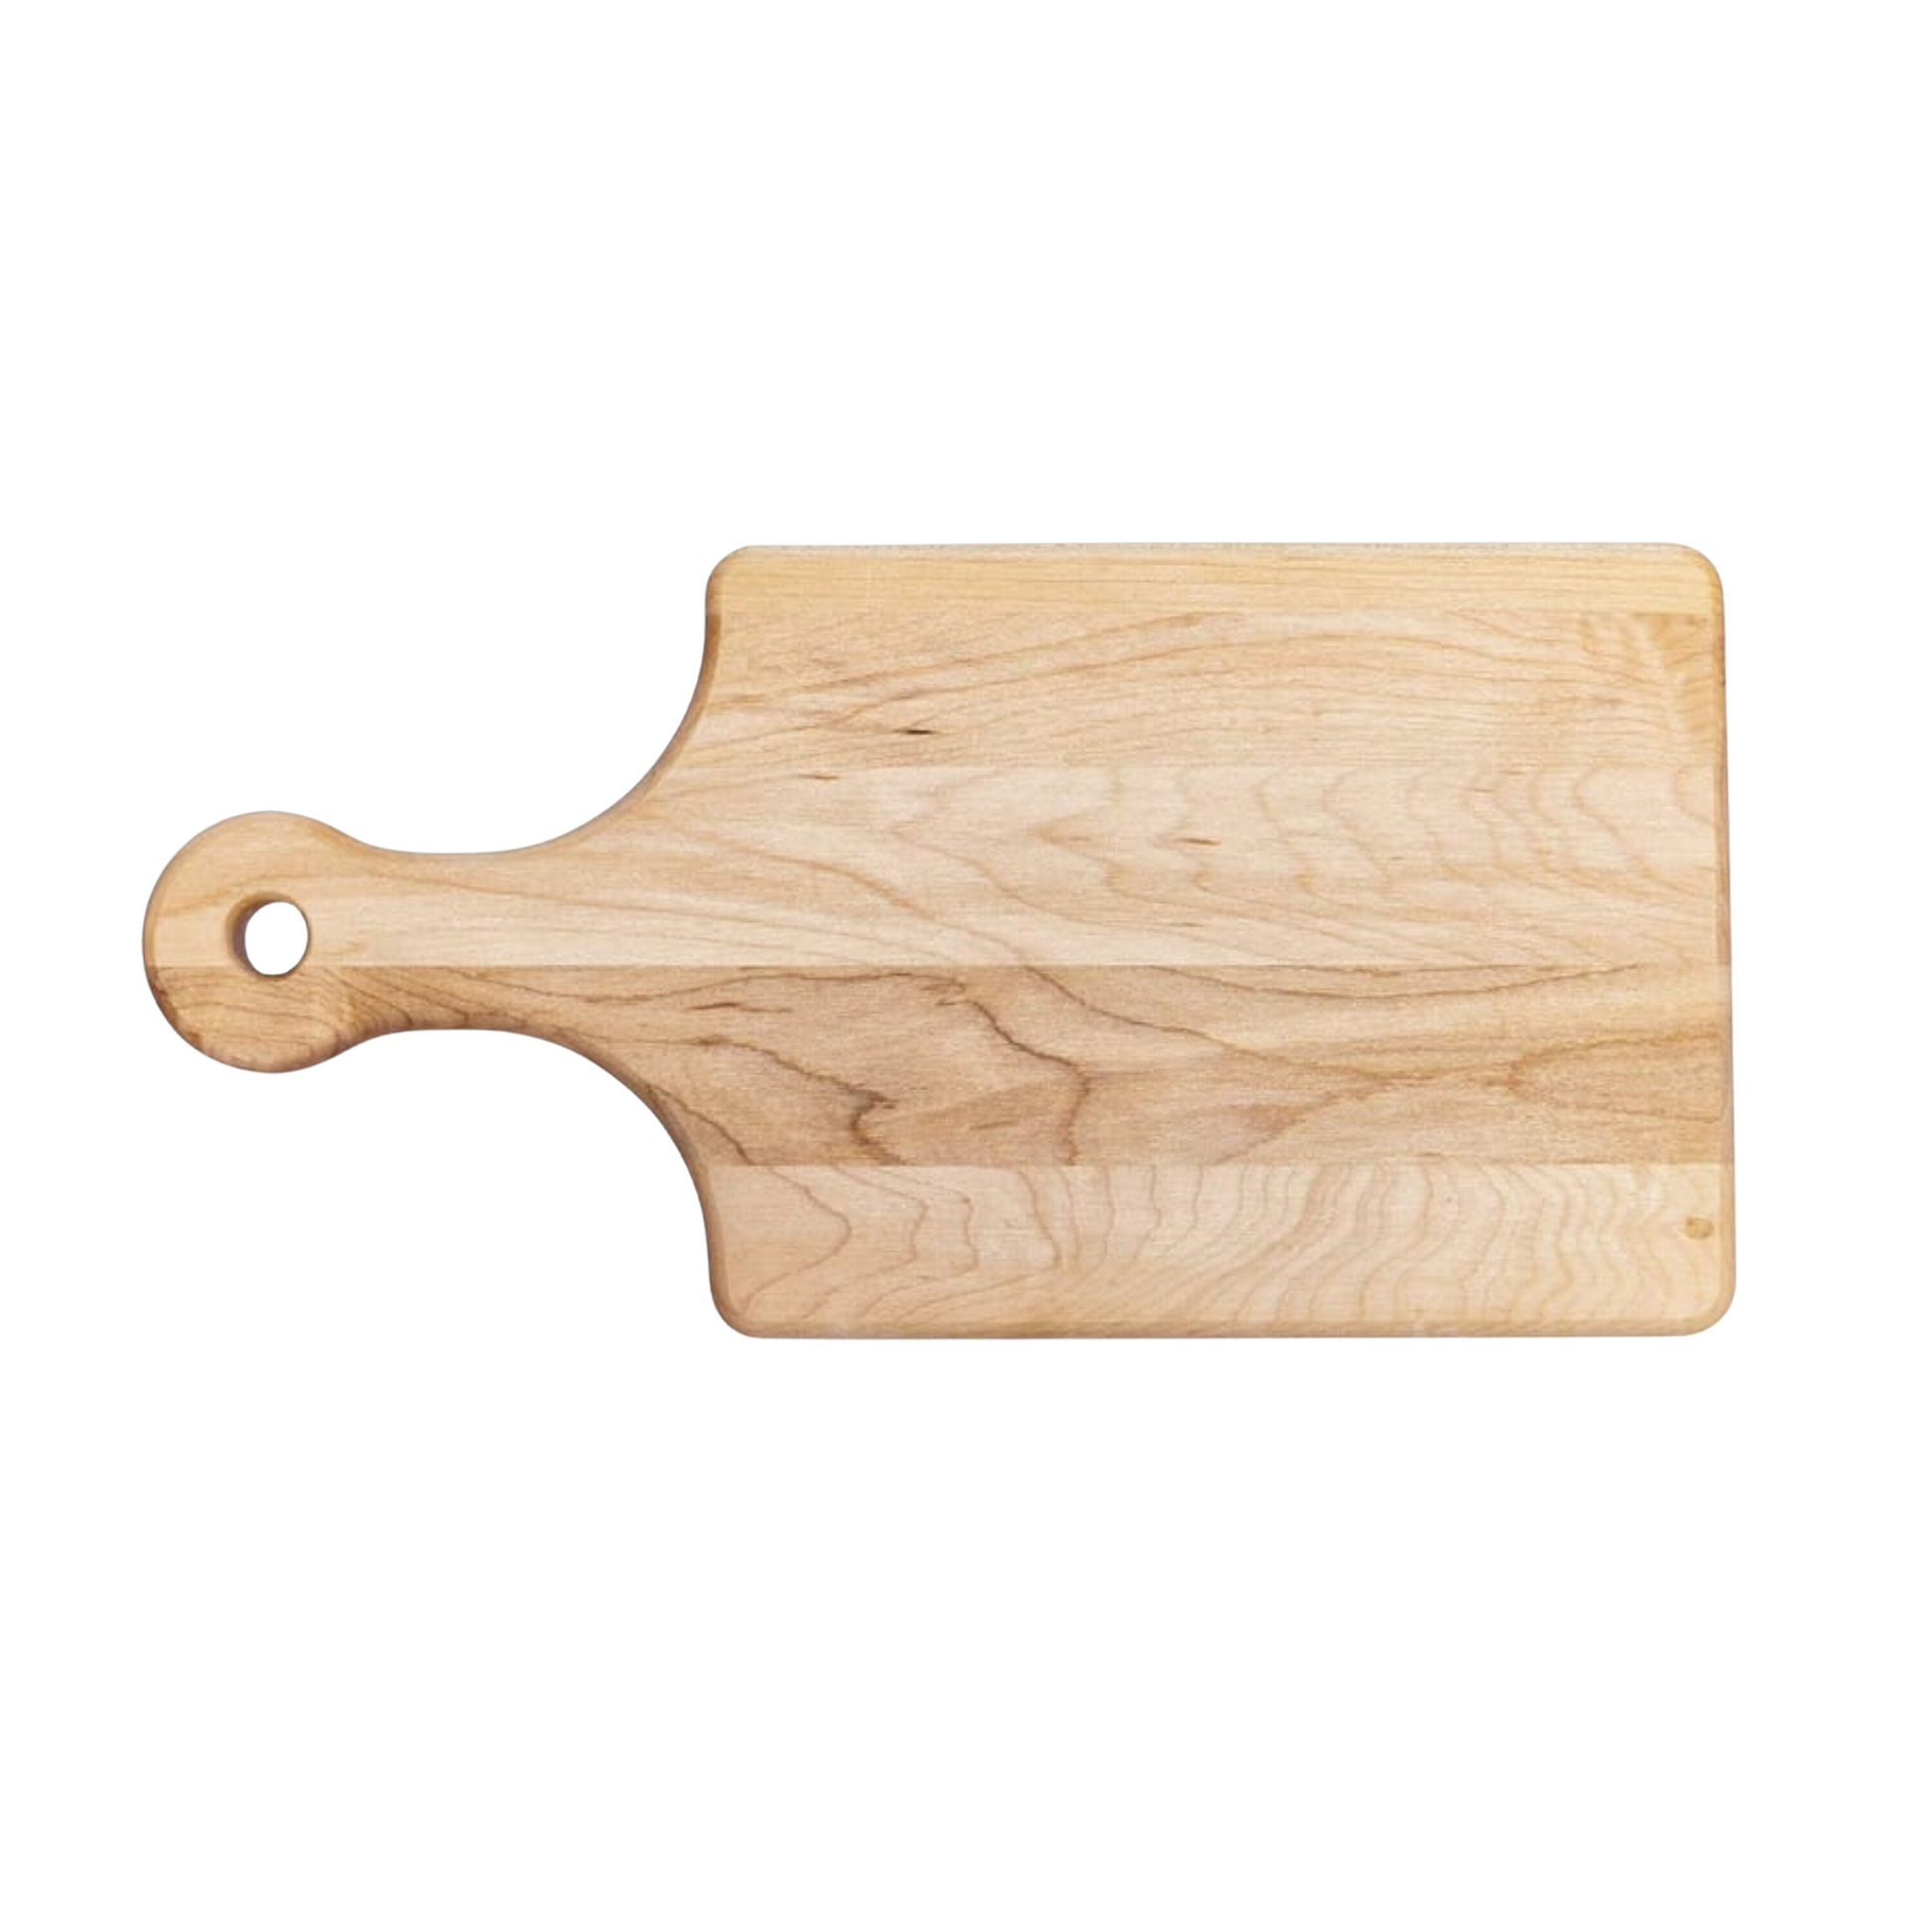 Happy Thanksgiving Cutting Board - Premium Cutting Boards from Hipster Lasers - Just $40! Shop now at Hipster Lasers